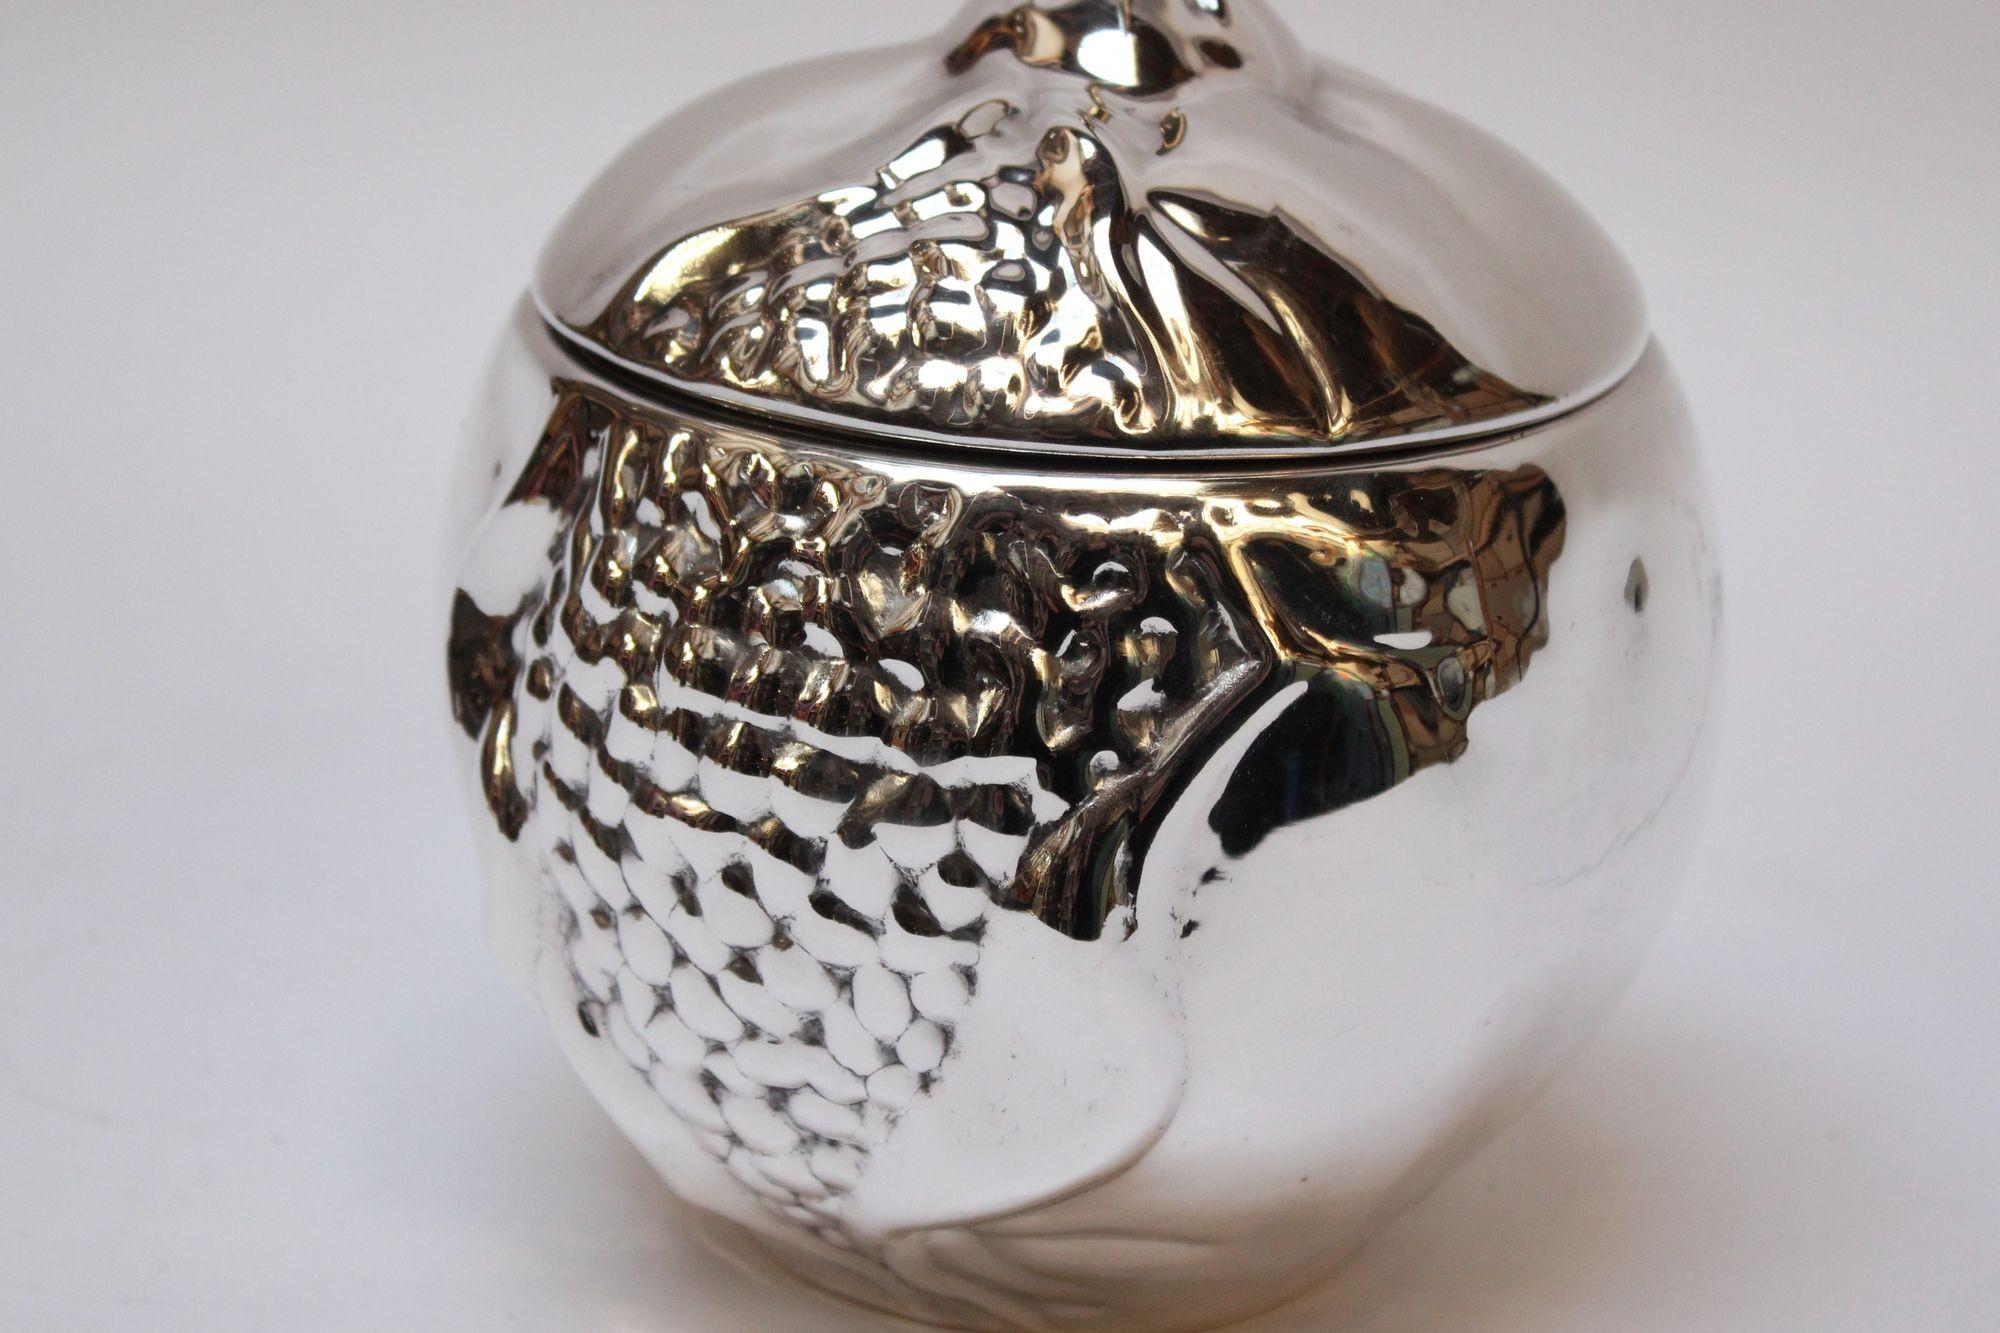 Italian Modernist Silver-Plated Insulated 